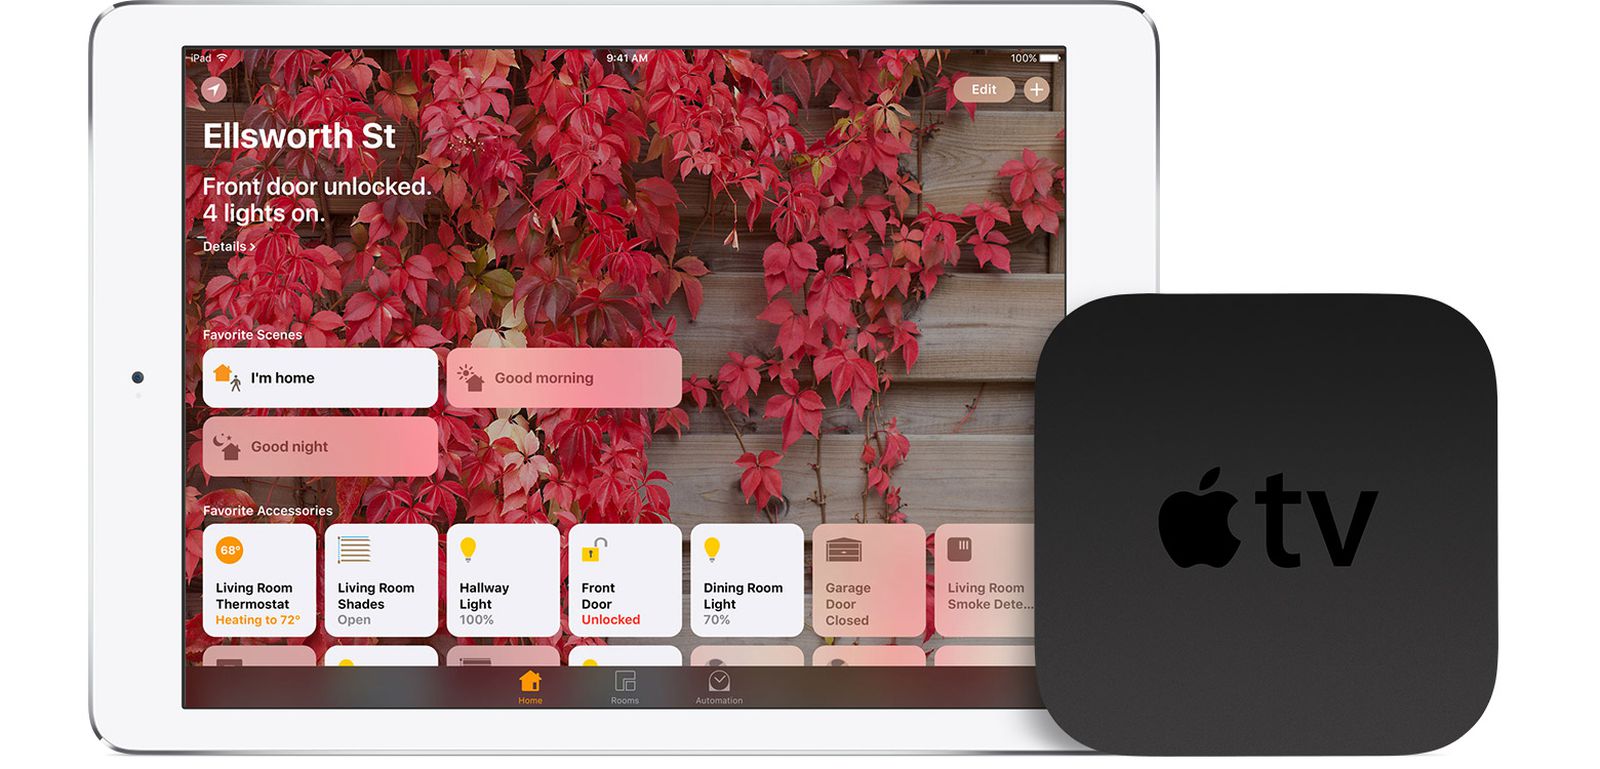 Apple Removed HomeKit Support for Third-Generation Apple TV With iOS 10  [Updated] - MacRumors